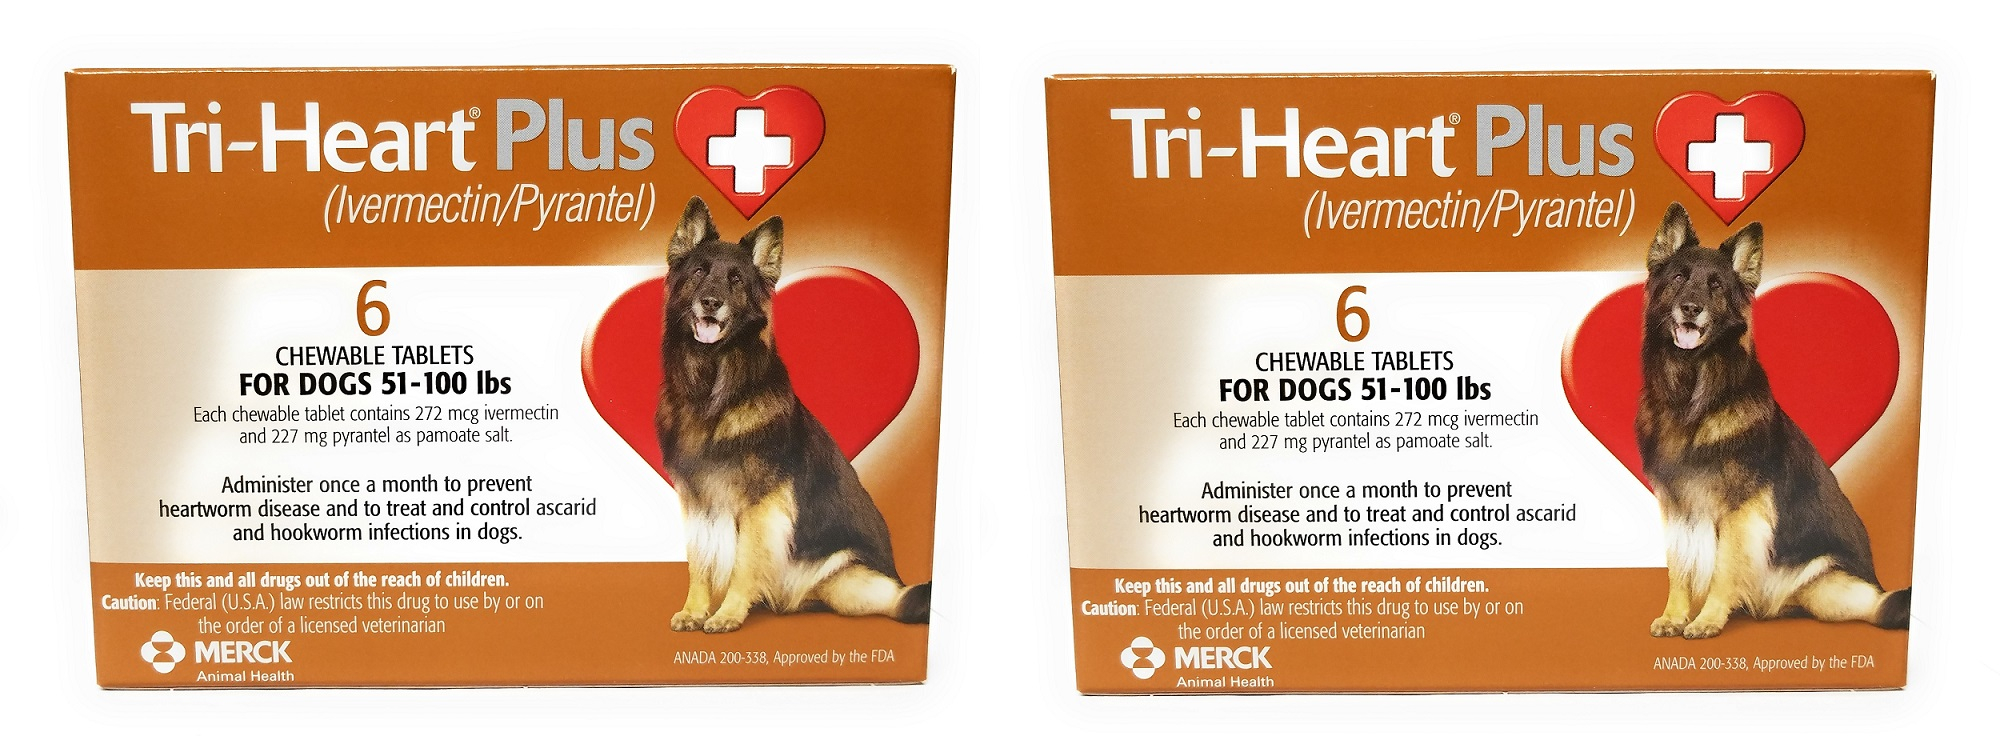 vet-approved-rx-tri-heart-plus-chew-tabs-51-100-lbs-brown-12